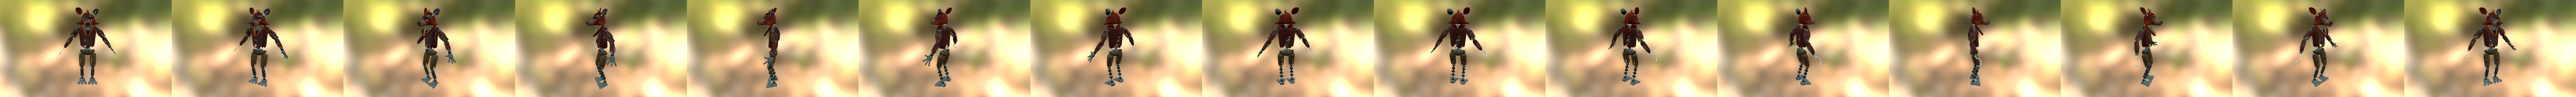 Withered Foxy - Five Nights At Freddyu0027s 2 Withered Foxy Foxy